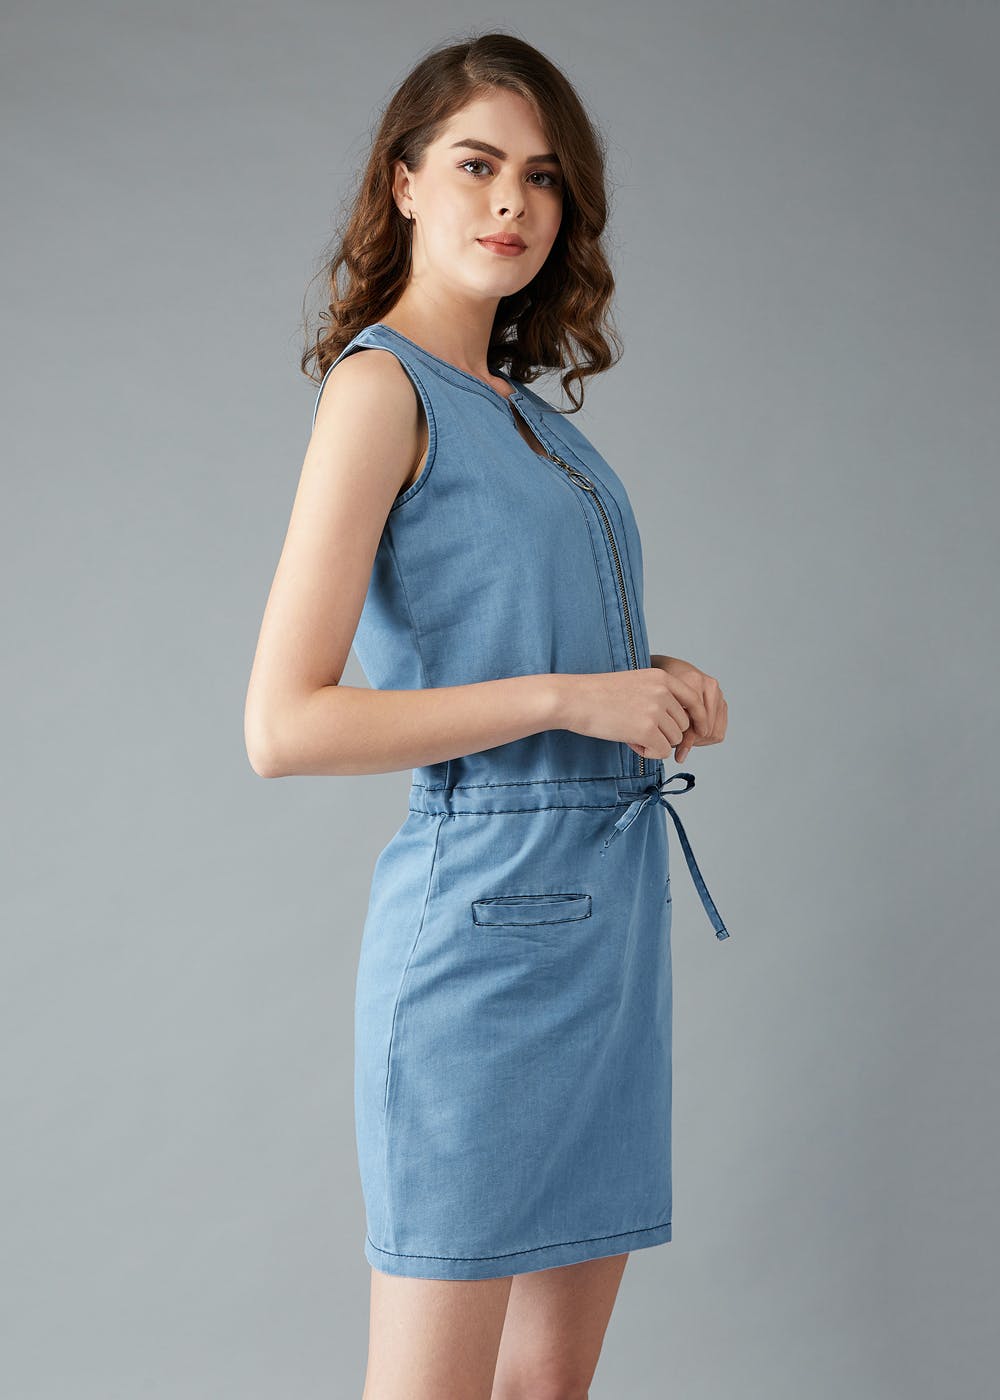 Cozami Casual Sleeveless Dark Blue Denim Dress For Women in  Aurangabad-Maharashtra at best price by A V Collection - Justdial